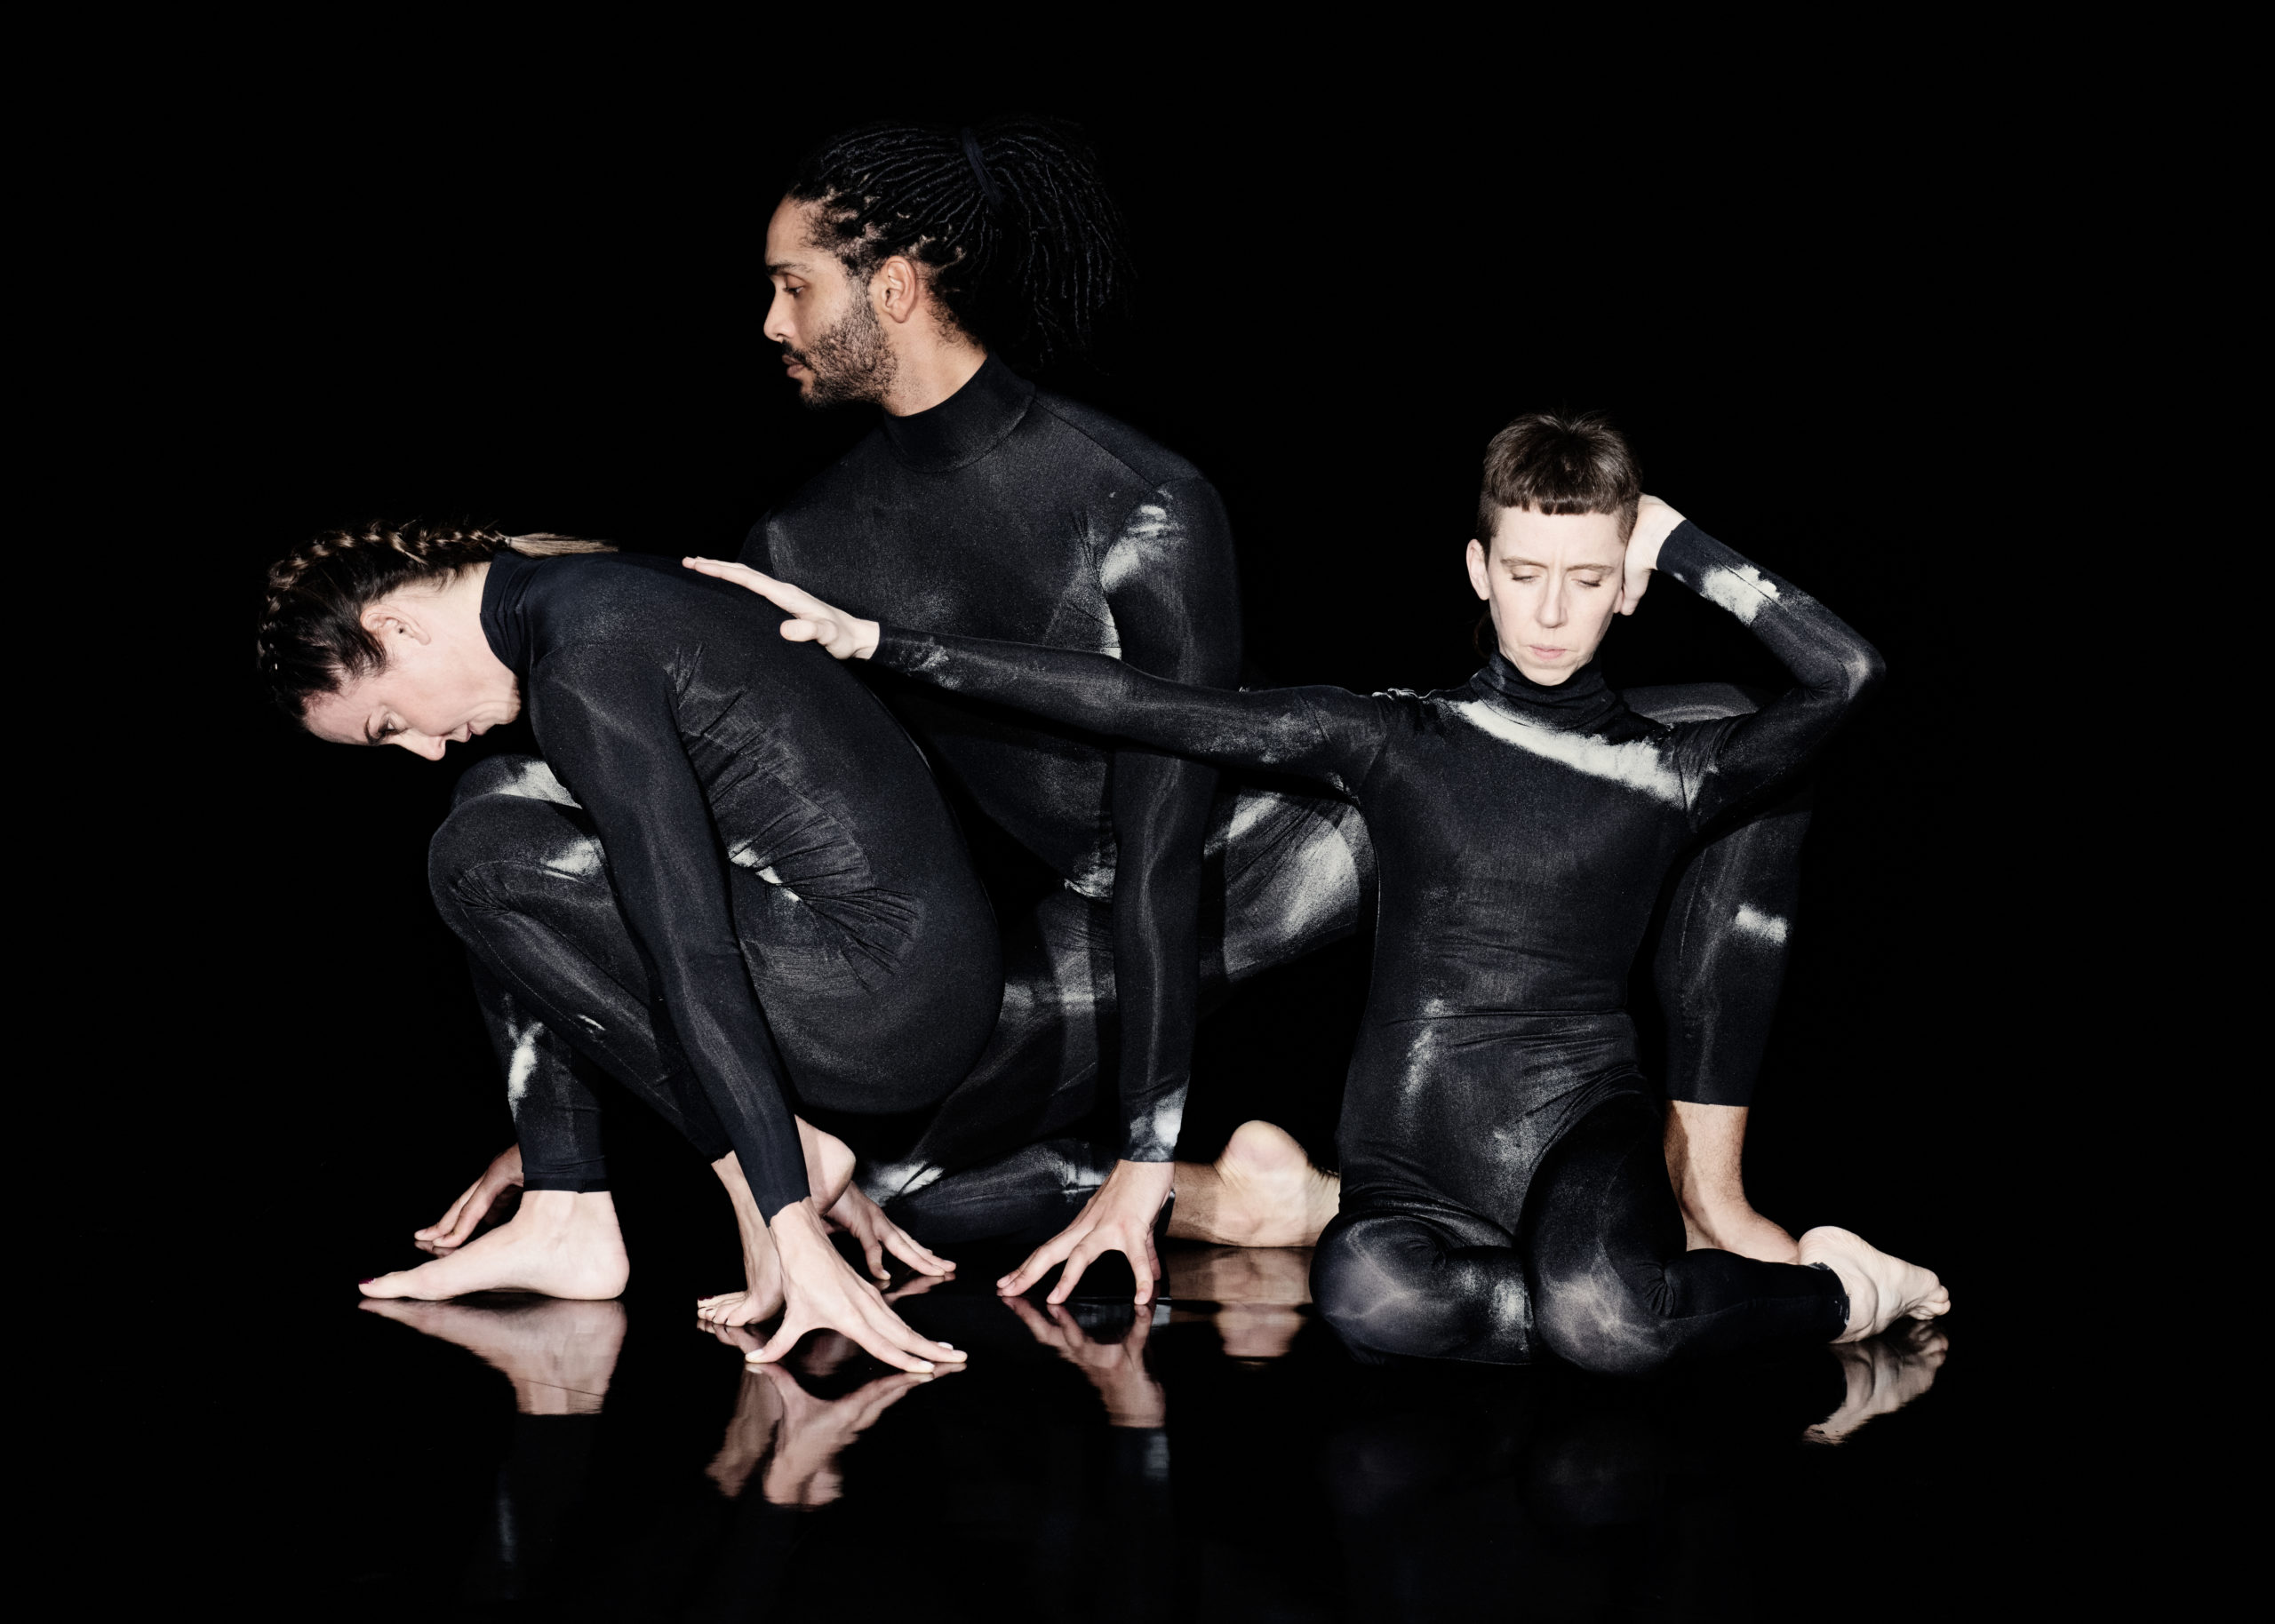 Three figures are crouched against a black background in a row wearing full length black leotards with white smoke-effect detailing. On the right is Jules Cunningham, facing forward and knelt down. They have their hair clipped short on the sides and long on the top and back. Their left hand is held behind their back and the right reaches out and rests on Melanie C’s back. In the centre is Harry Alexander, also kneeling and facing front on with his eyes gazing to the side. His hair is sectioned into locs and pulled back, and he has dark stubble on his jaw and chin. On the left is Melanie C, crouched profile and facing away from Jules. She is resting on her palms and feet with her back arched and head hanging toward the ground. Her hair is neatly plaited into a single Dutch braid.